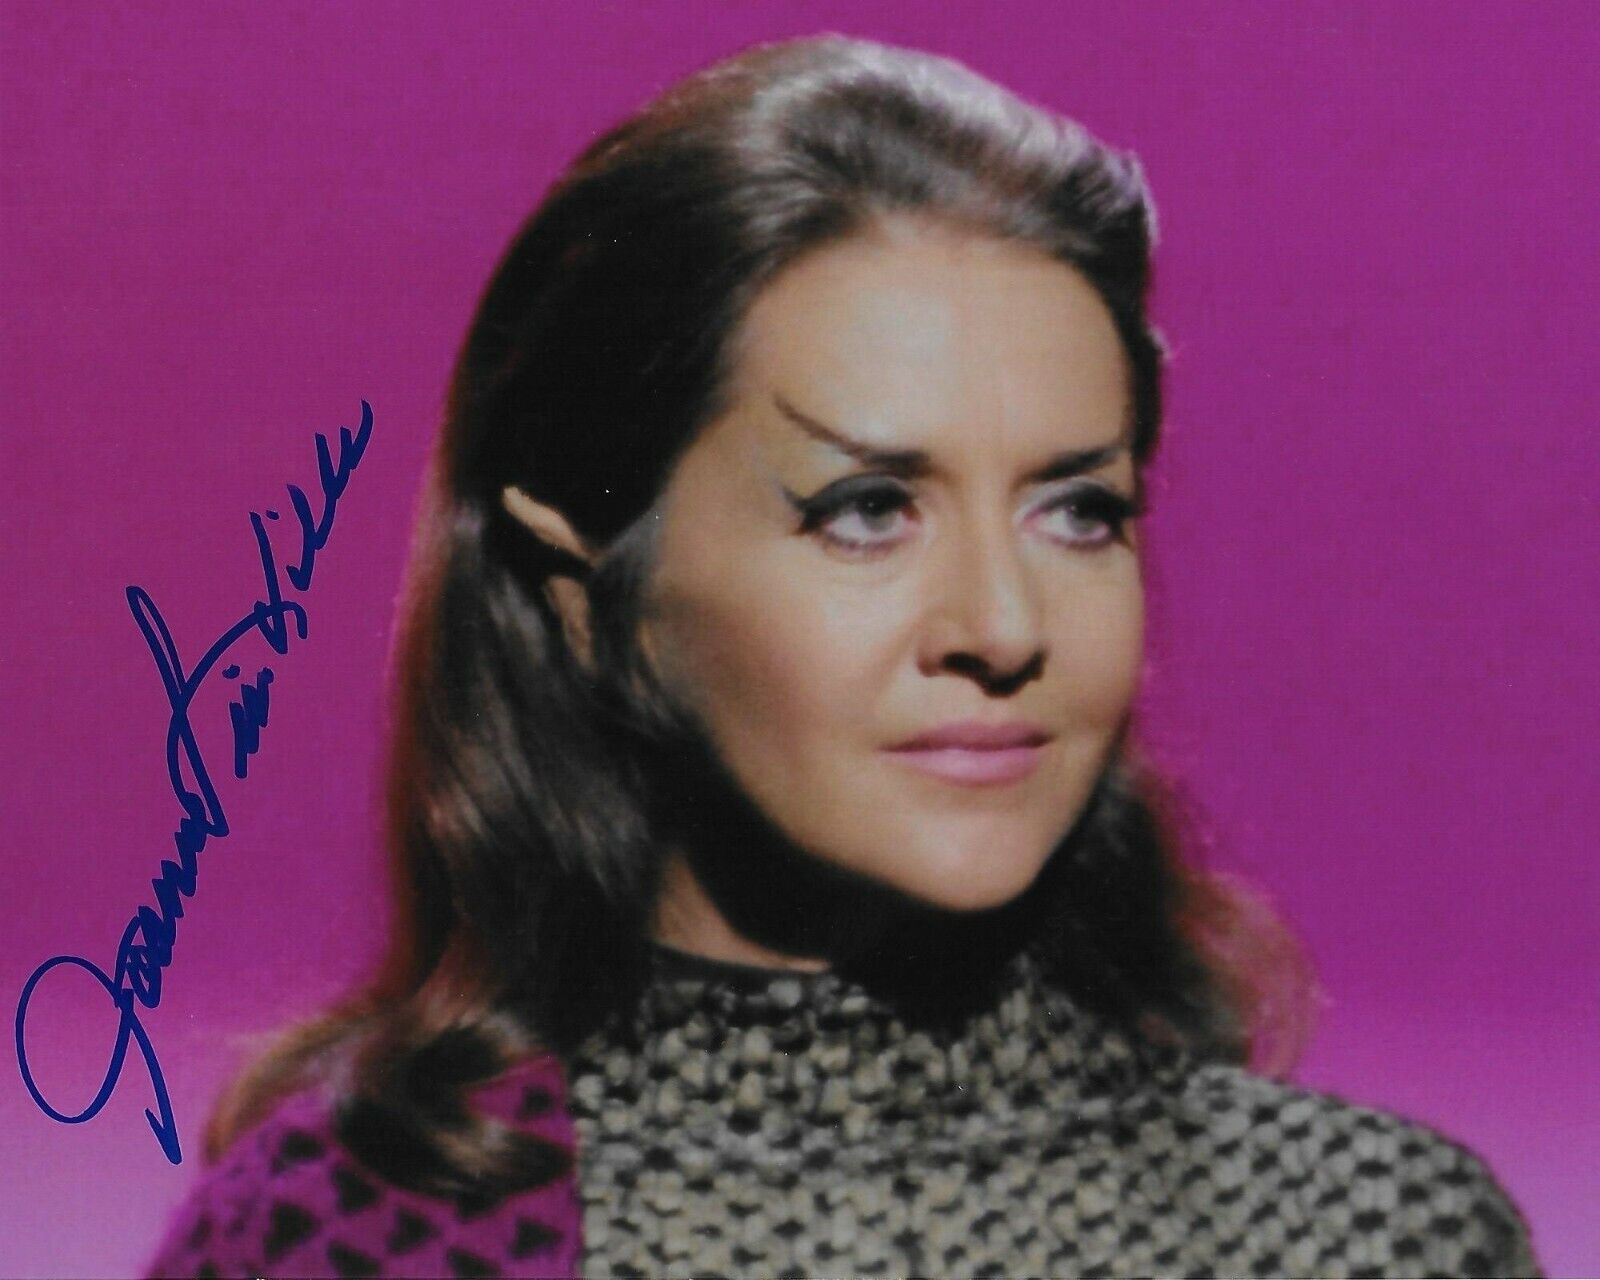 Joanne Linville RIP 1928-2021 Signed 8x10 Photo Poster painting #5 - Star Trek TOS